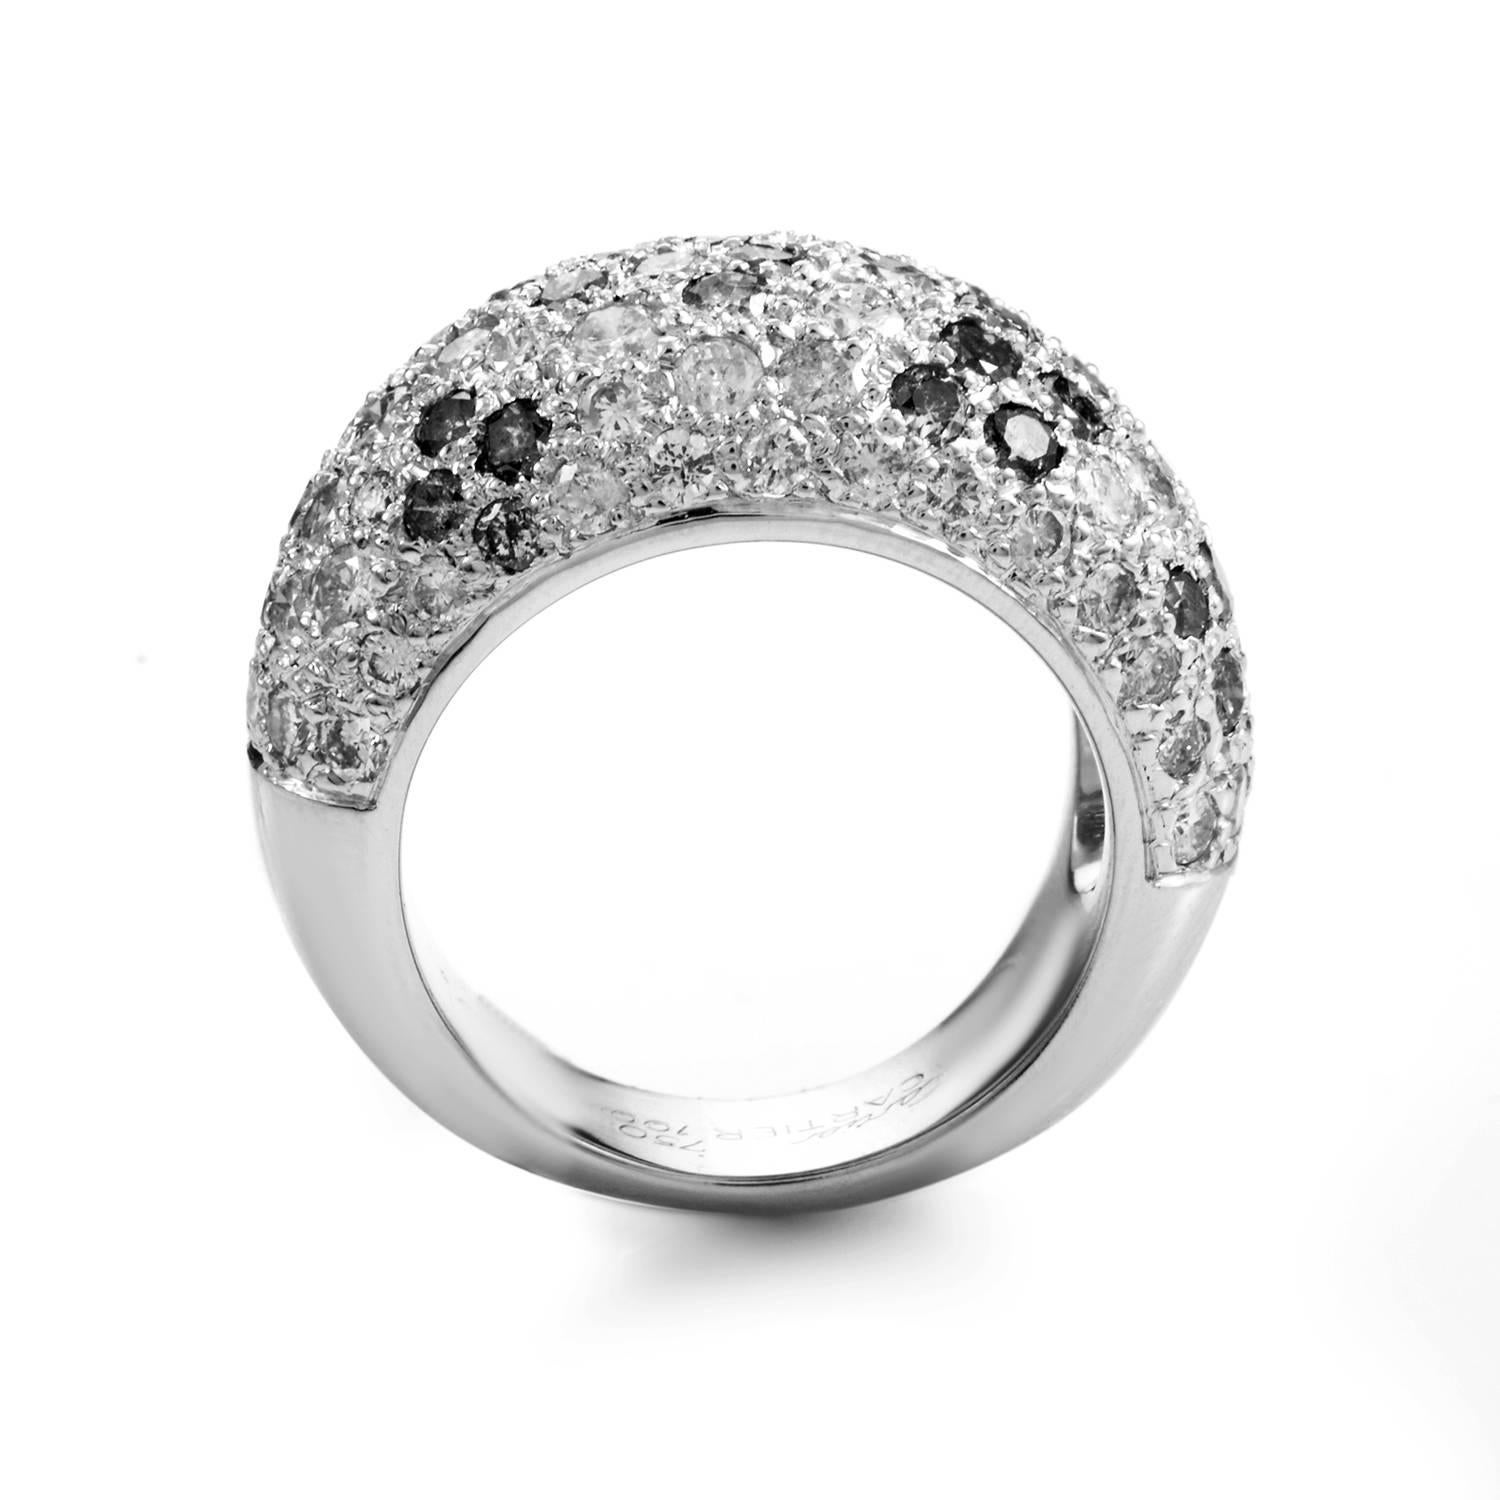 Black and white diamonds perform to stunning effect in this ring design from Cartier. Like a bed of exotic coral reef glimpsed through Arctic seas, the band's hearty expanse of 18K White Gold rises through a shimmering spill of precious stones. The